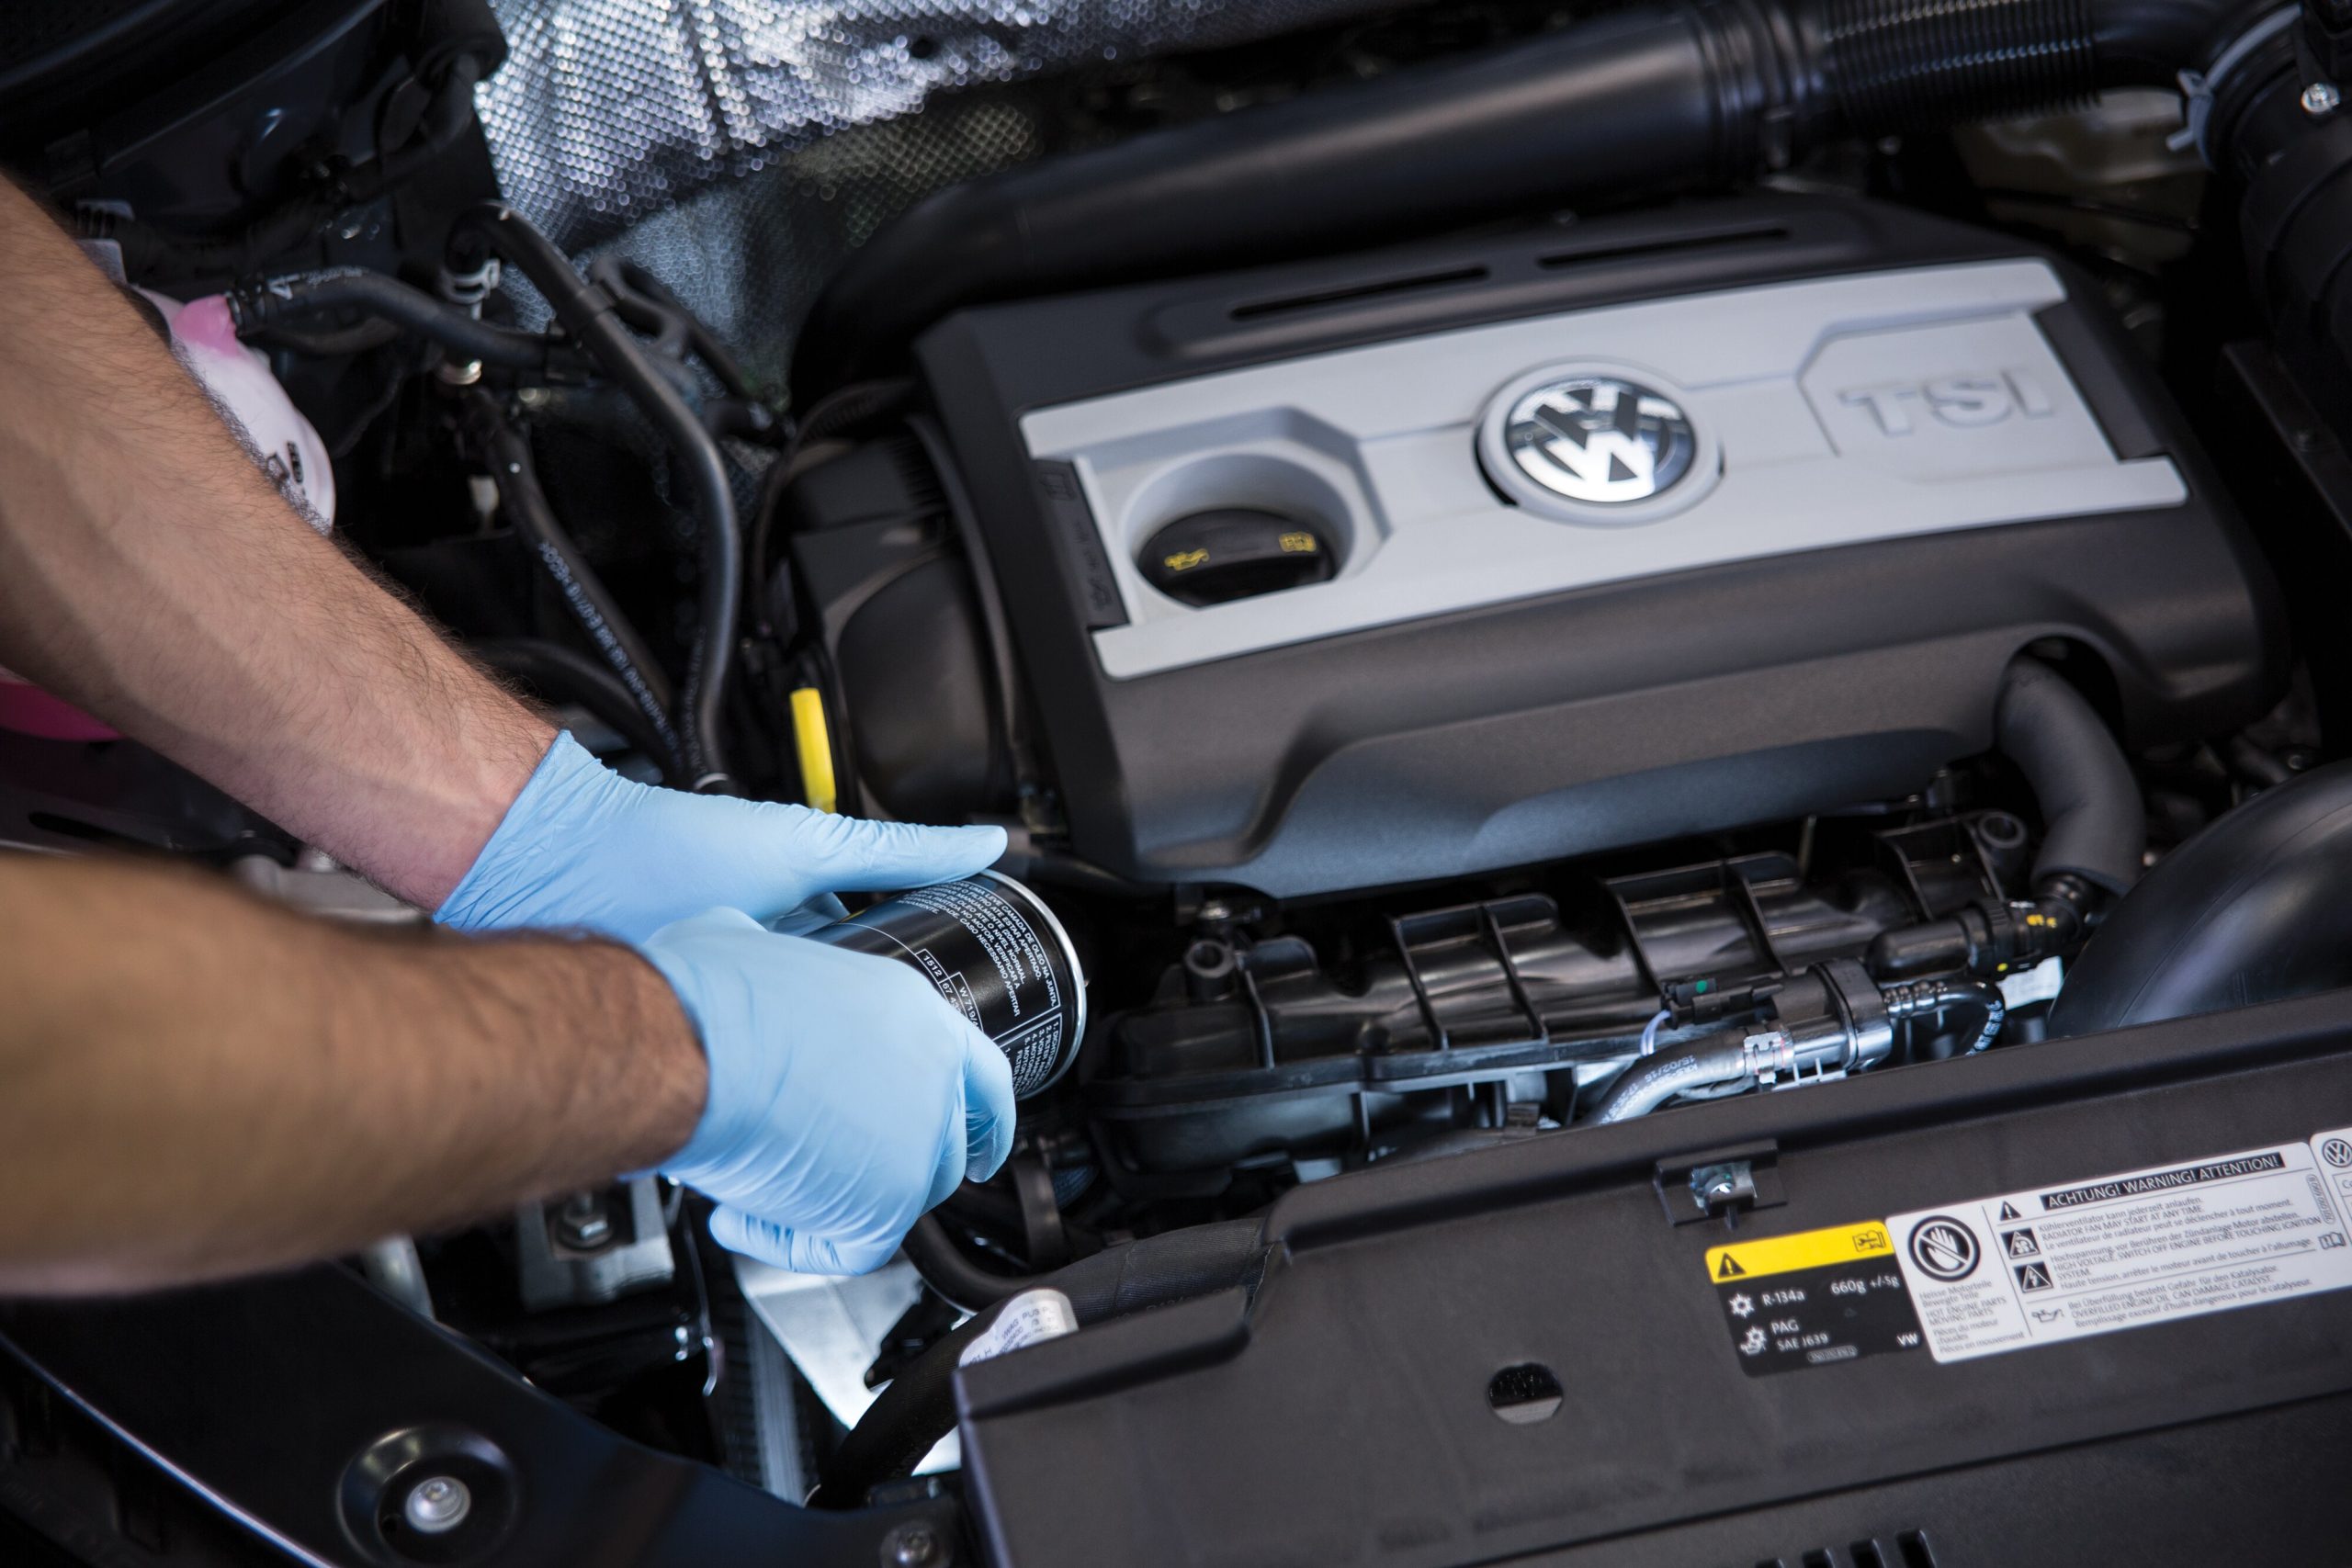 Volkswagen Service Center – Offering Convenience, Quality, and Benefits for Your Car